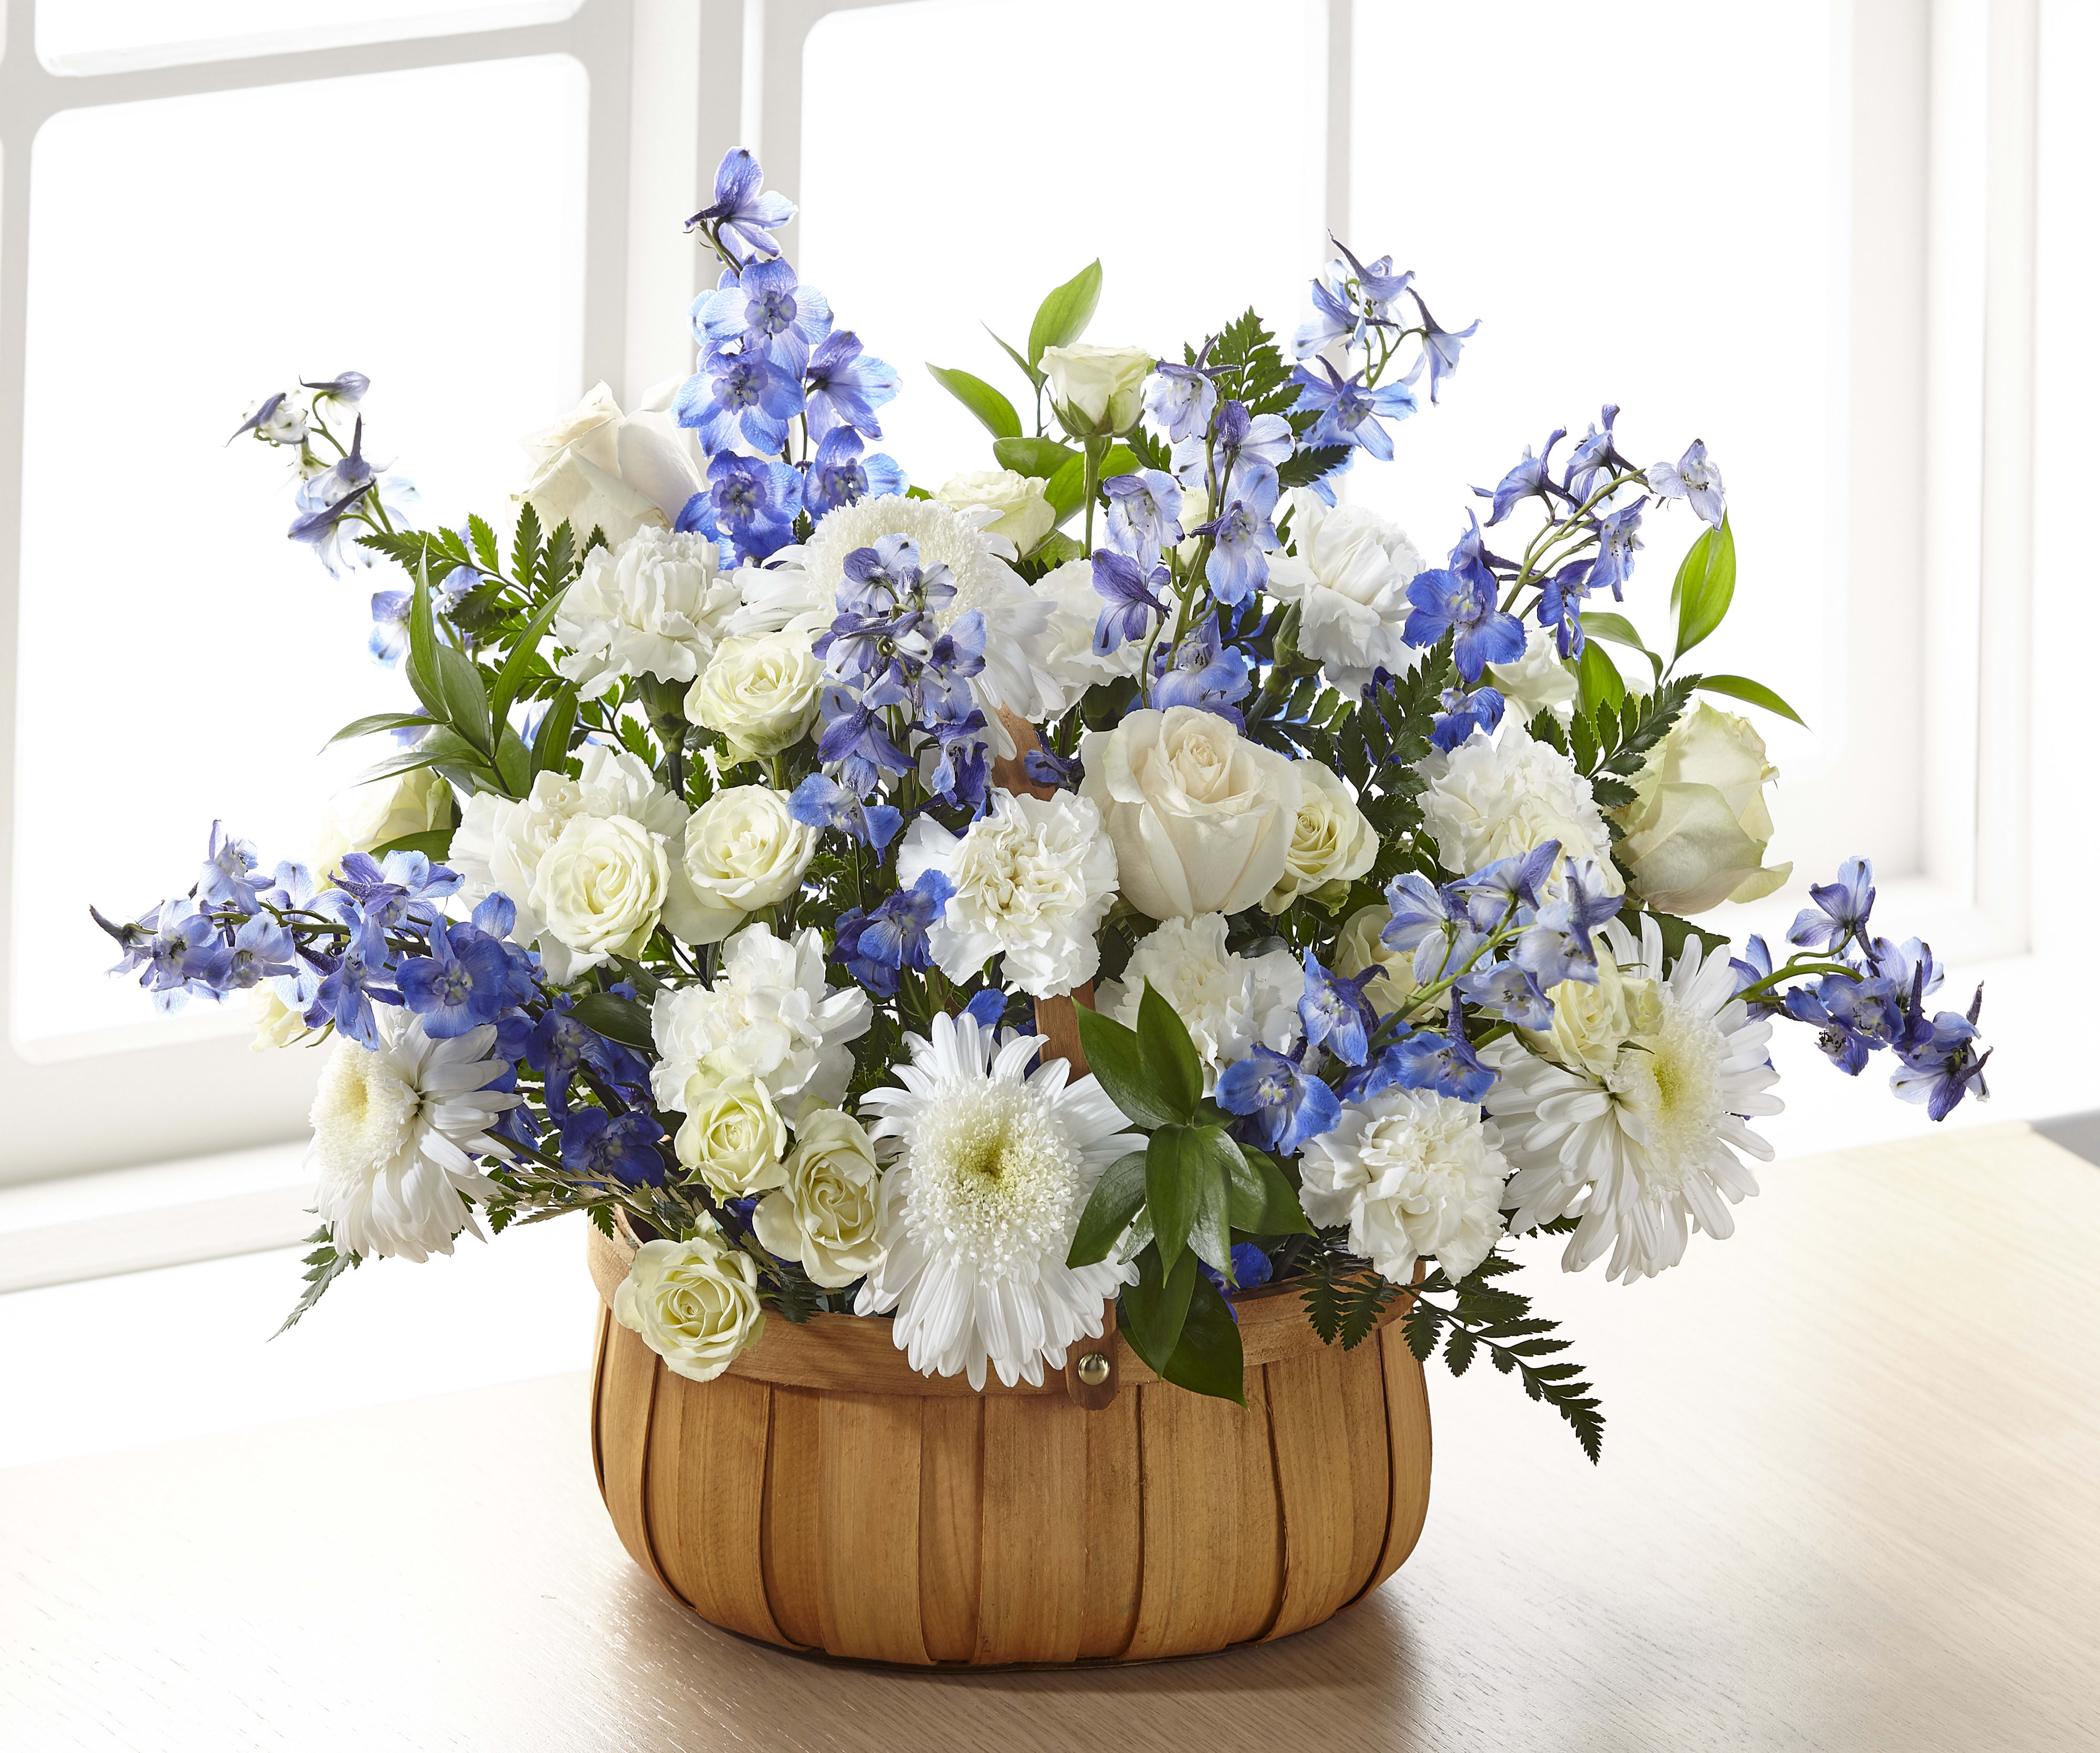 Blue and White Basket Arrangement - Assortment of blue and white flowers. Standard option is pictured. May vary from photo